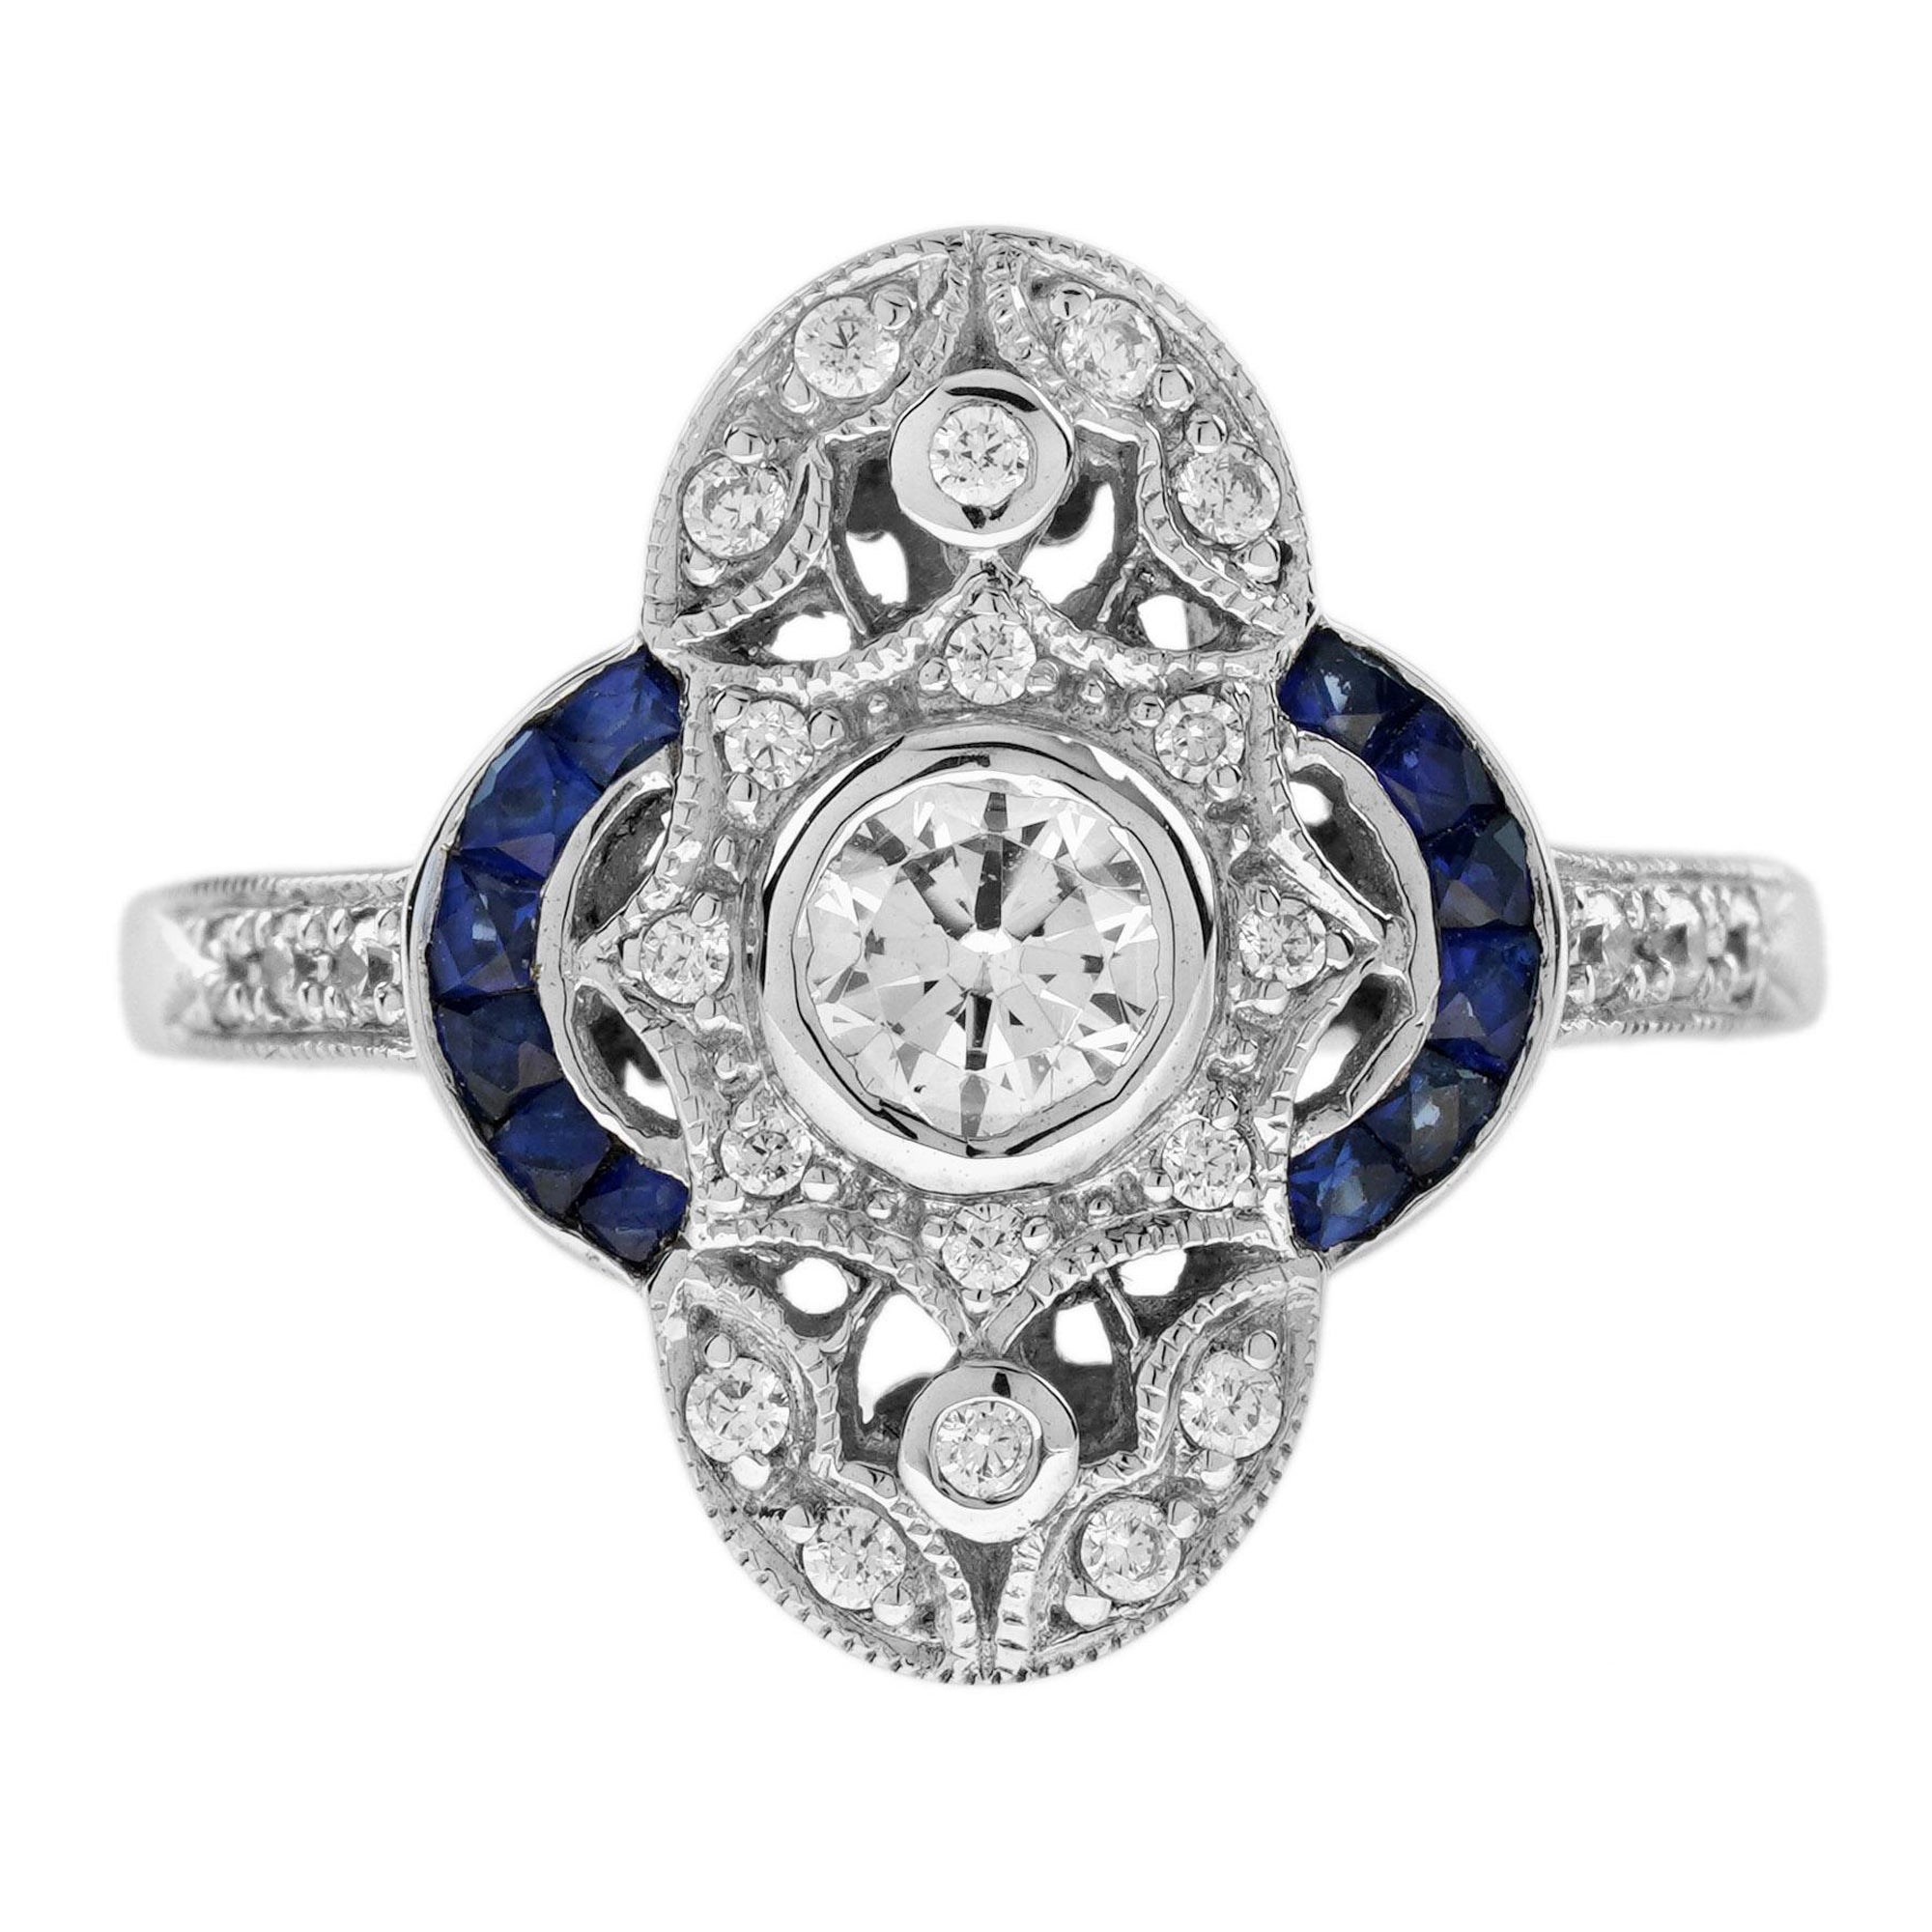 For Sale:  Diamond and Blue Sapphire Art Deco Style Cluster Ring in 18K White Gold